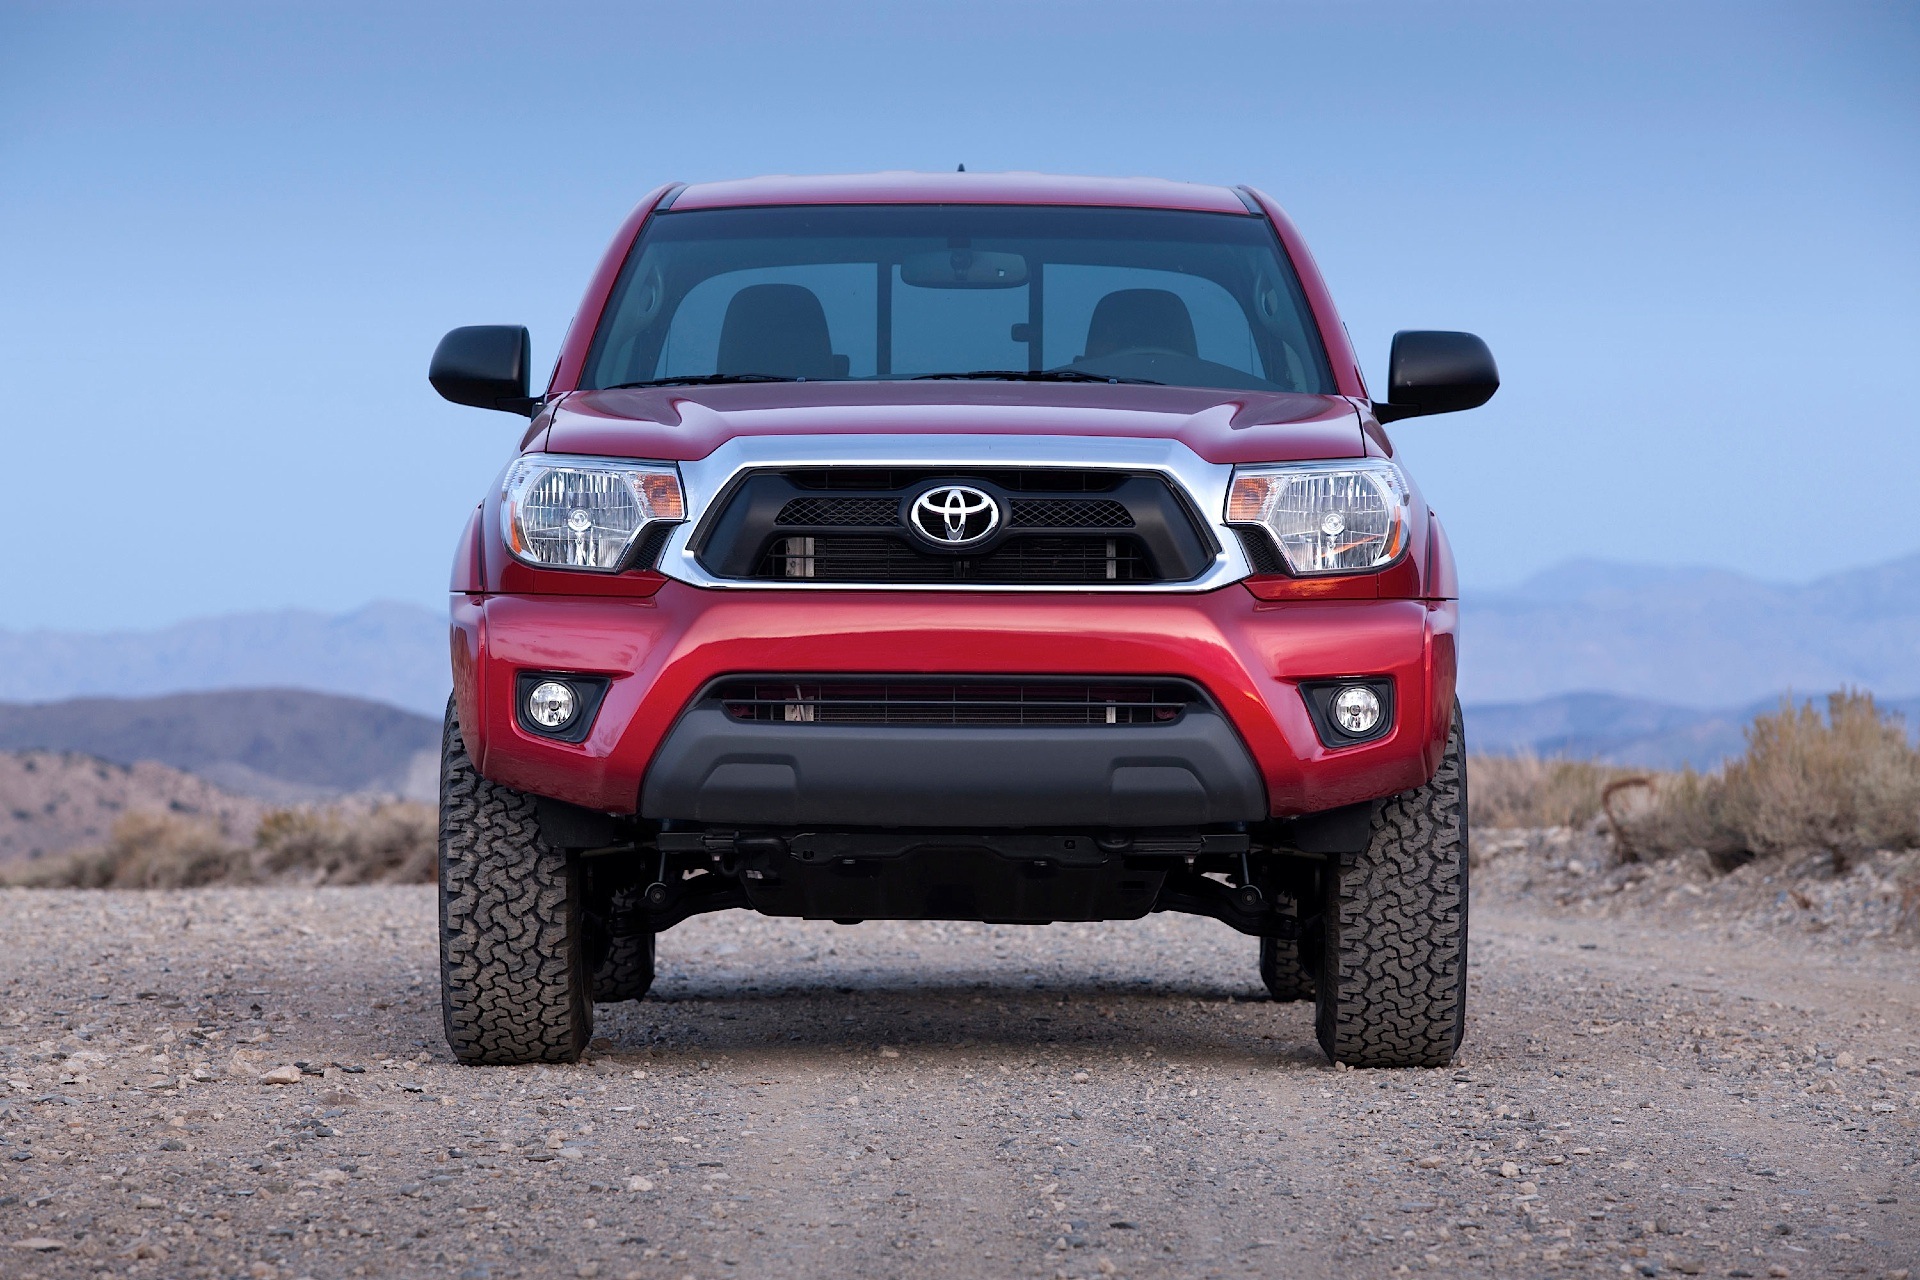 2006 Toyota tacoma gross weight